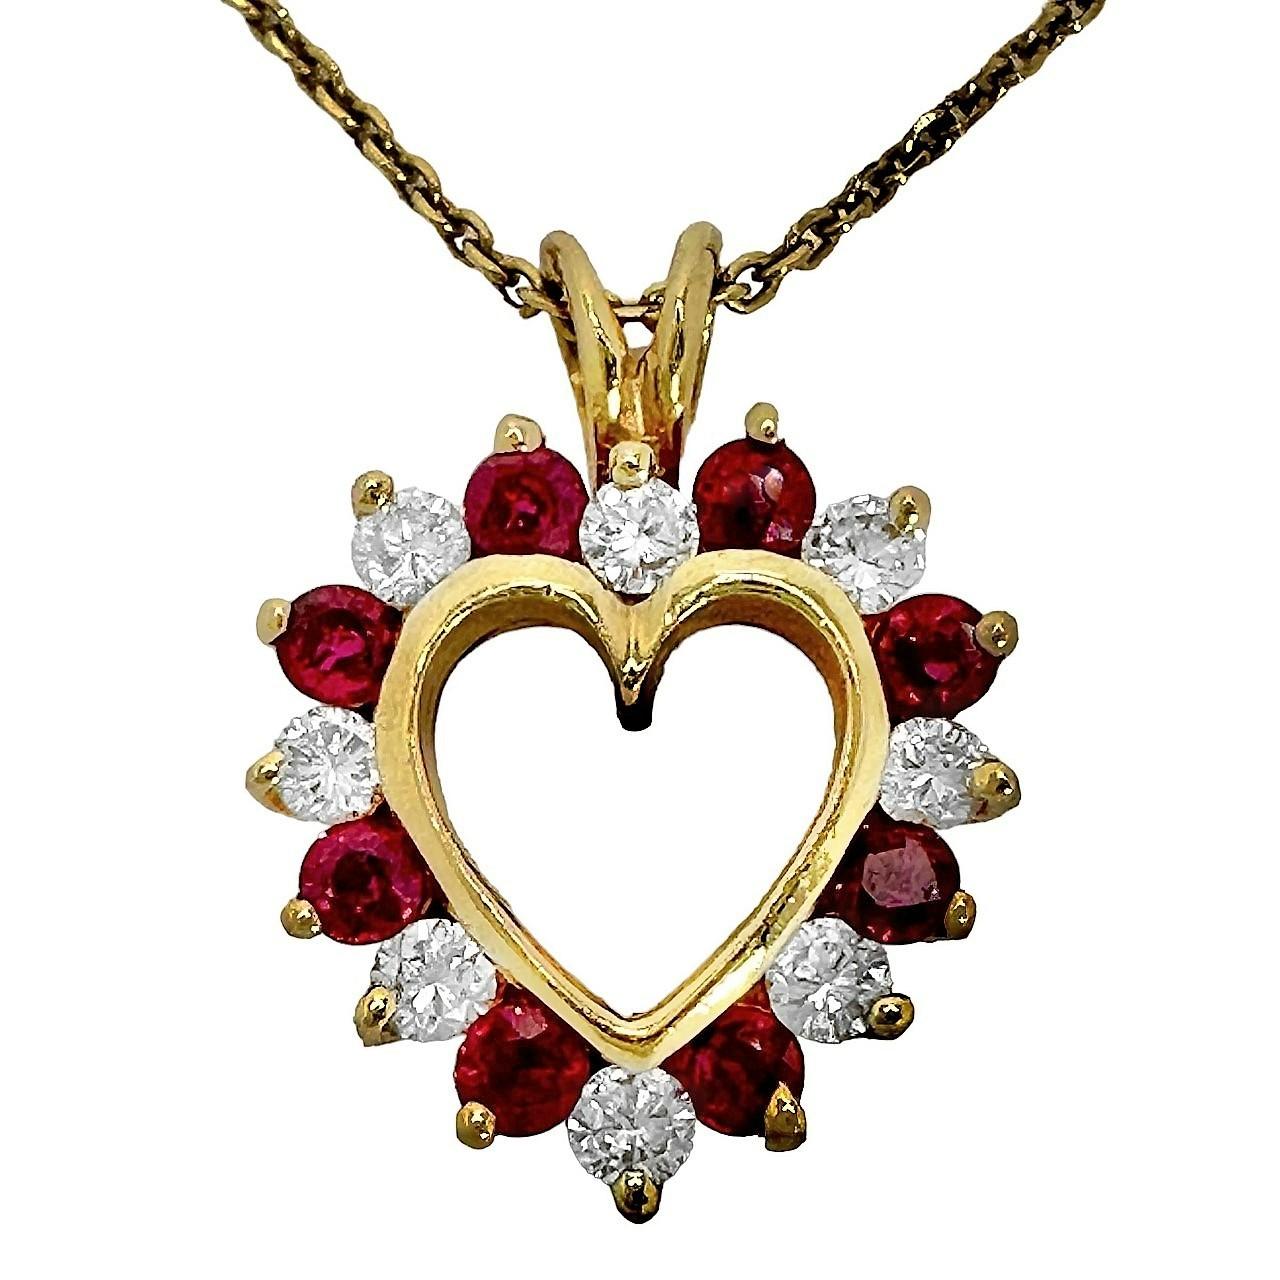 Petite Modern Gold Heart Pendant with Rubies and Diamonds